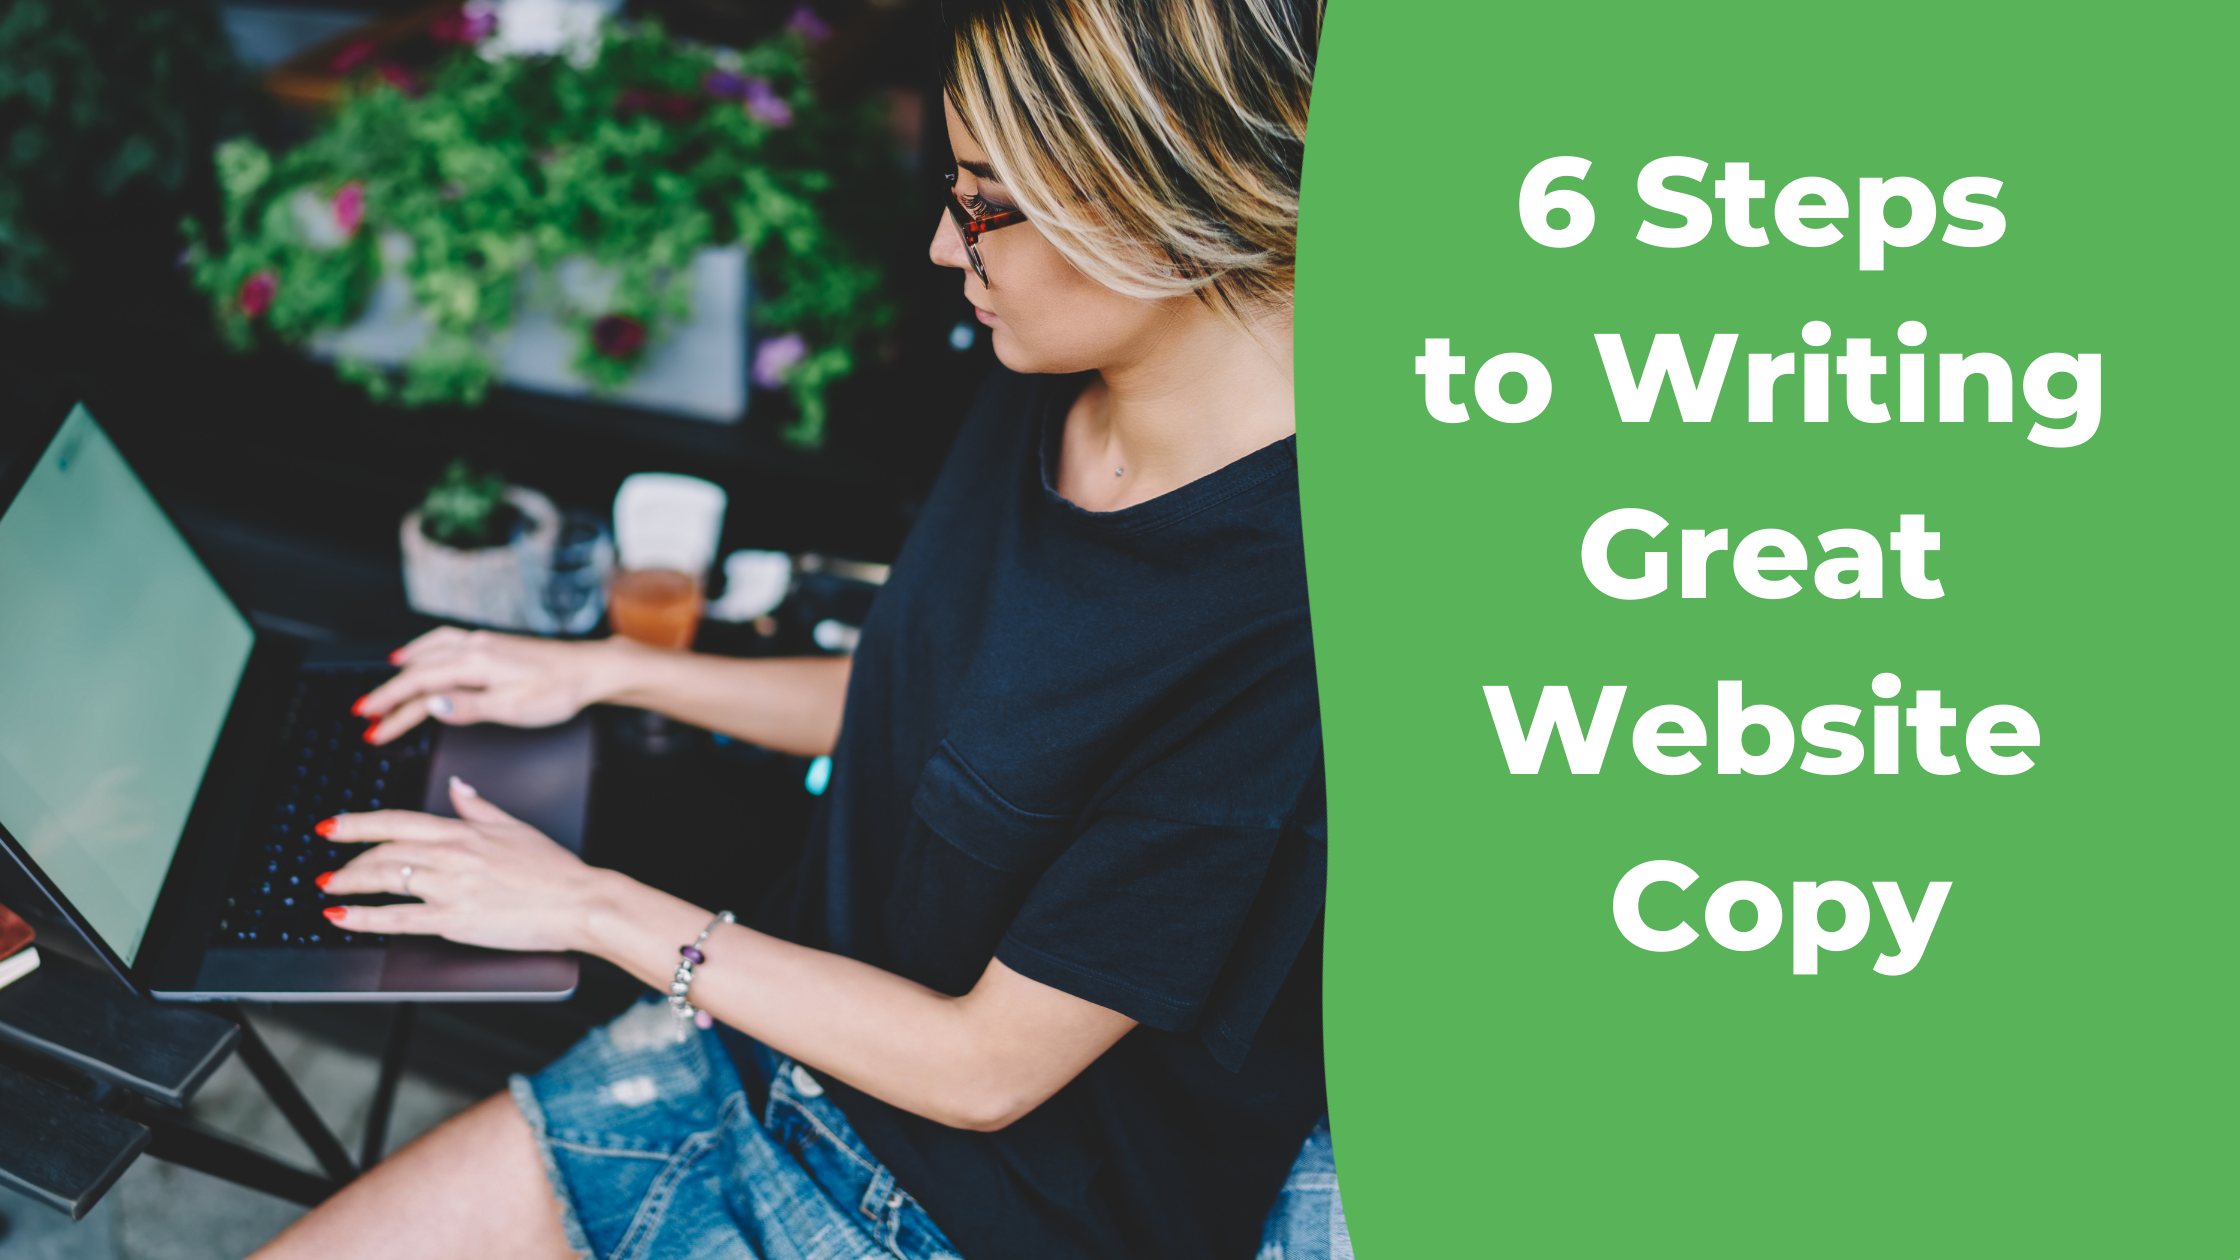 6 Steps to Writing Great Website Copy